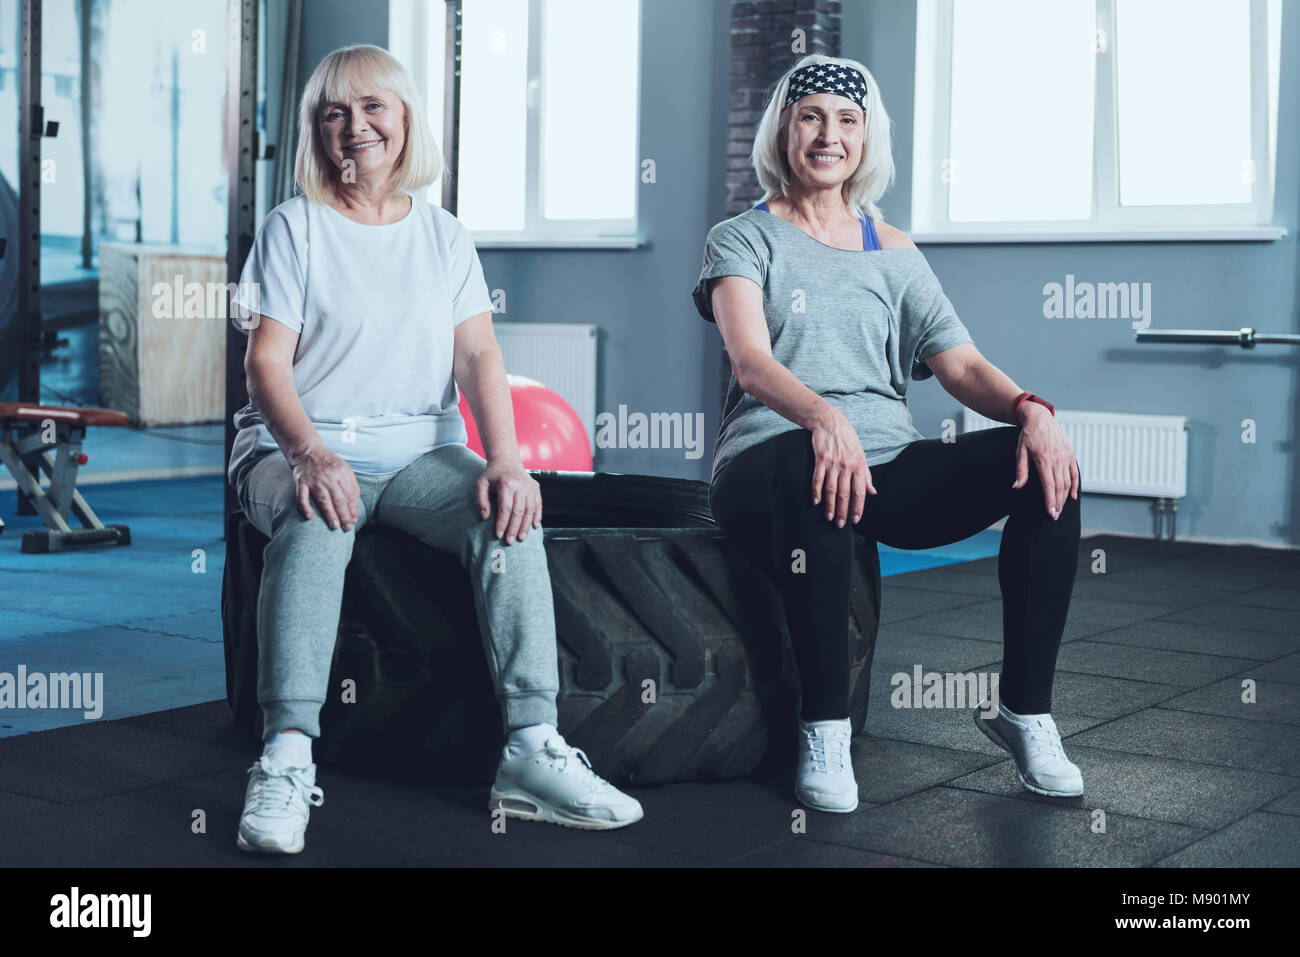 Pleasant retired ladies having rest on tire after training class Stock Photo